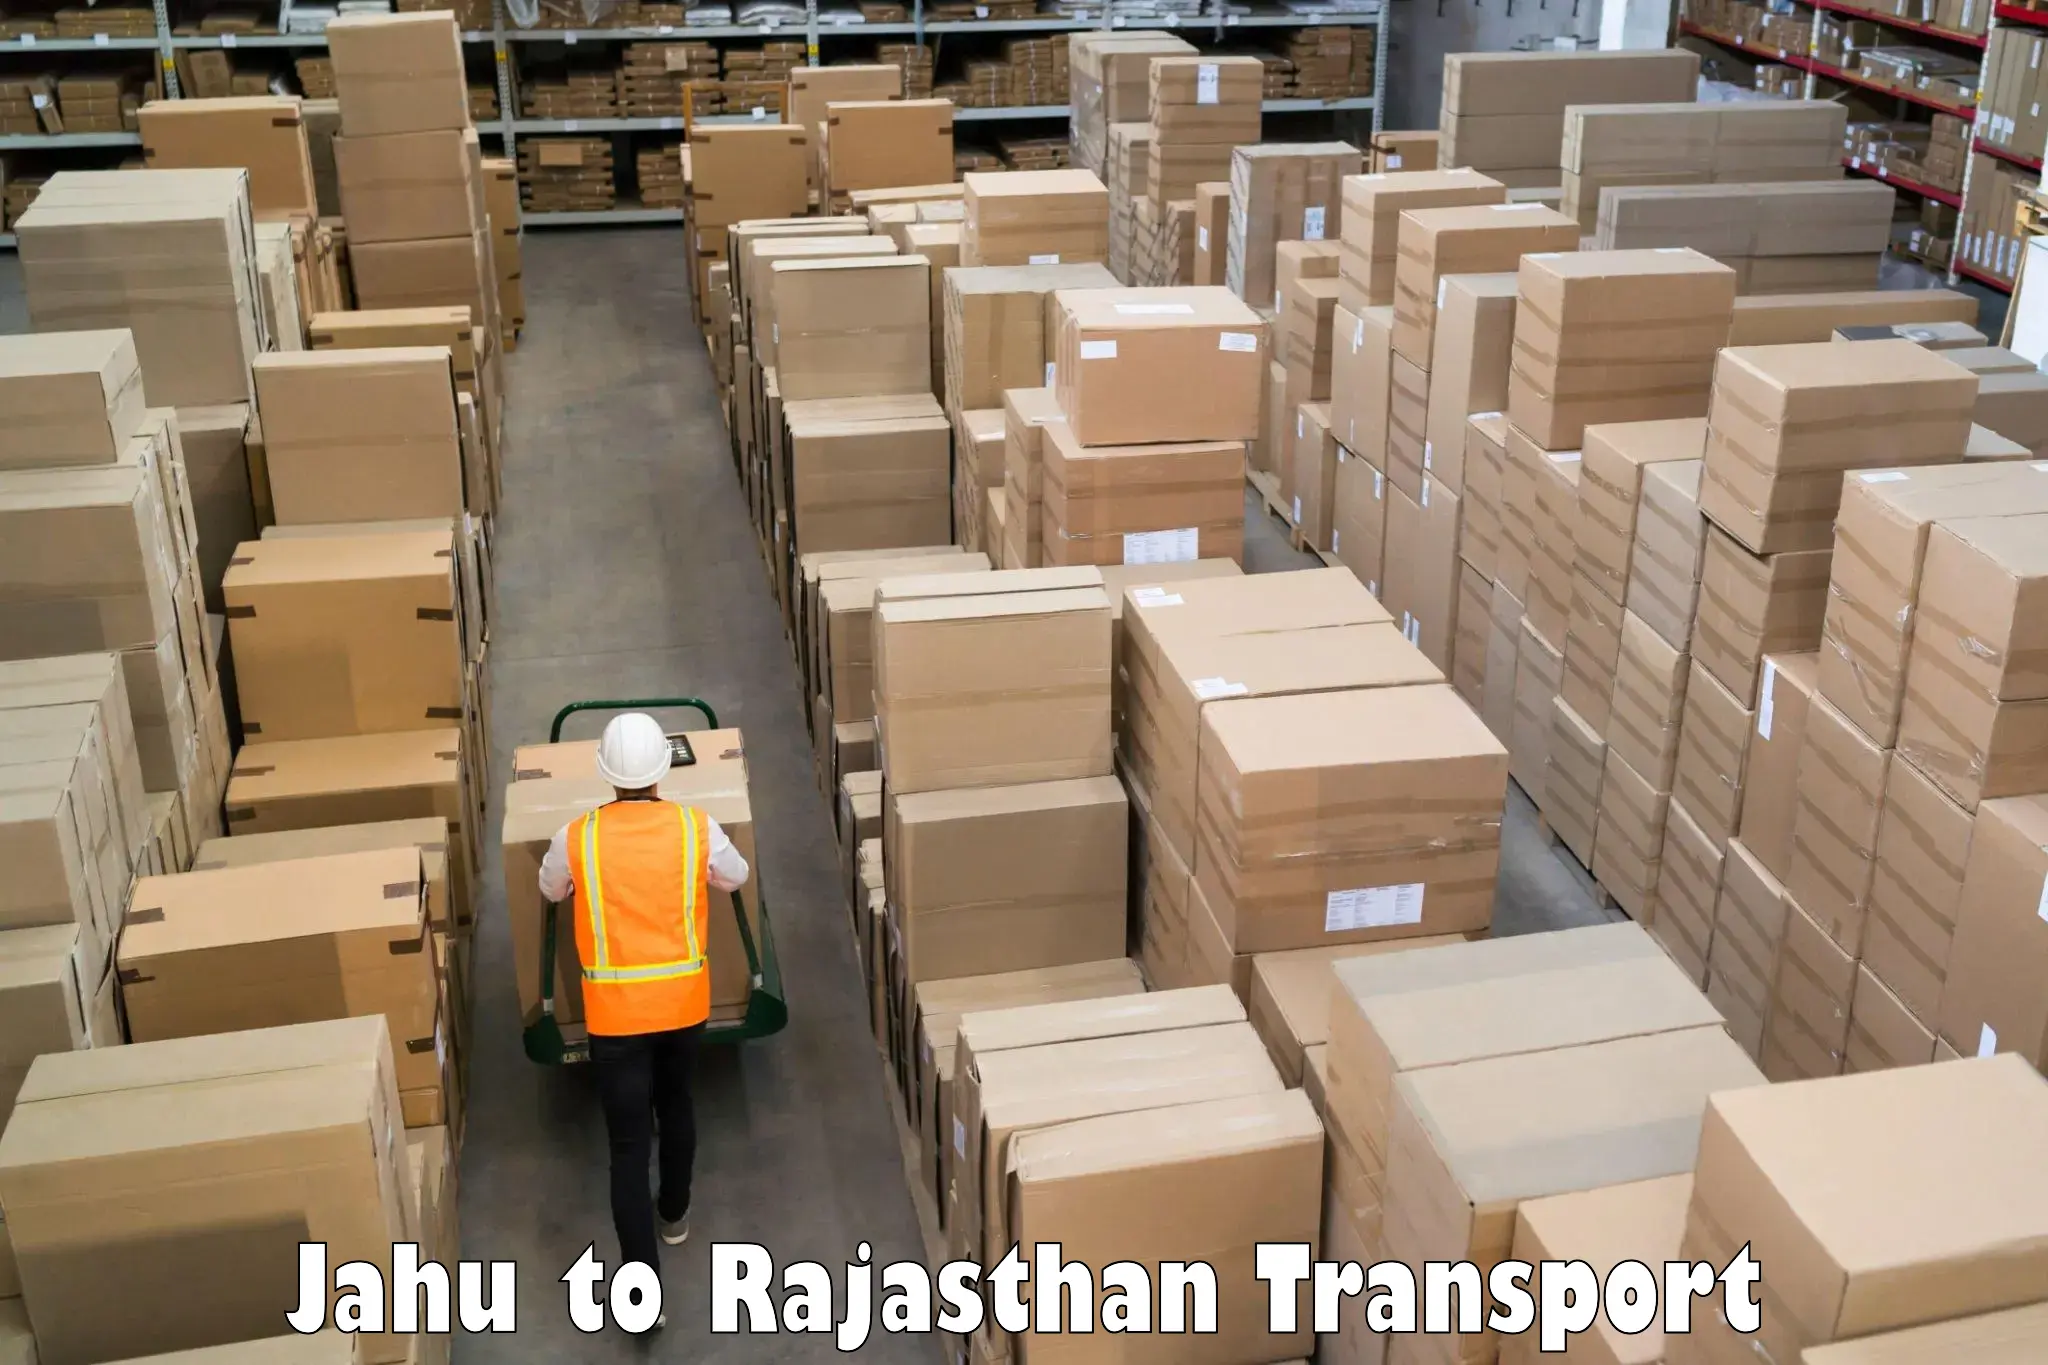 Commercial transport service Jahu to Kishangarh